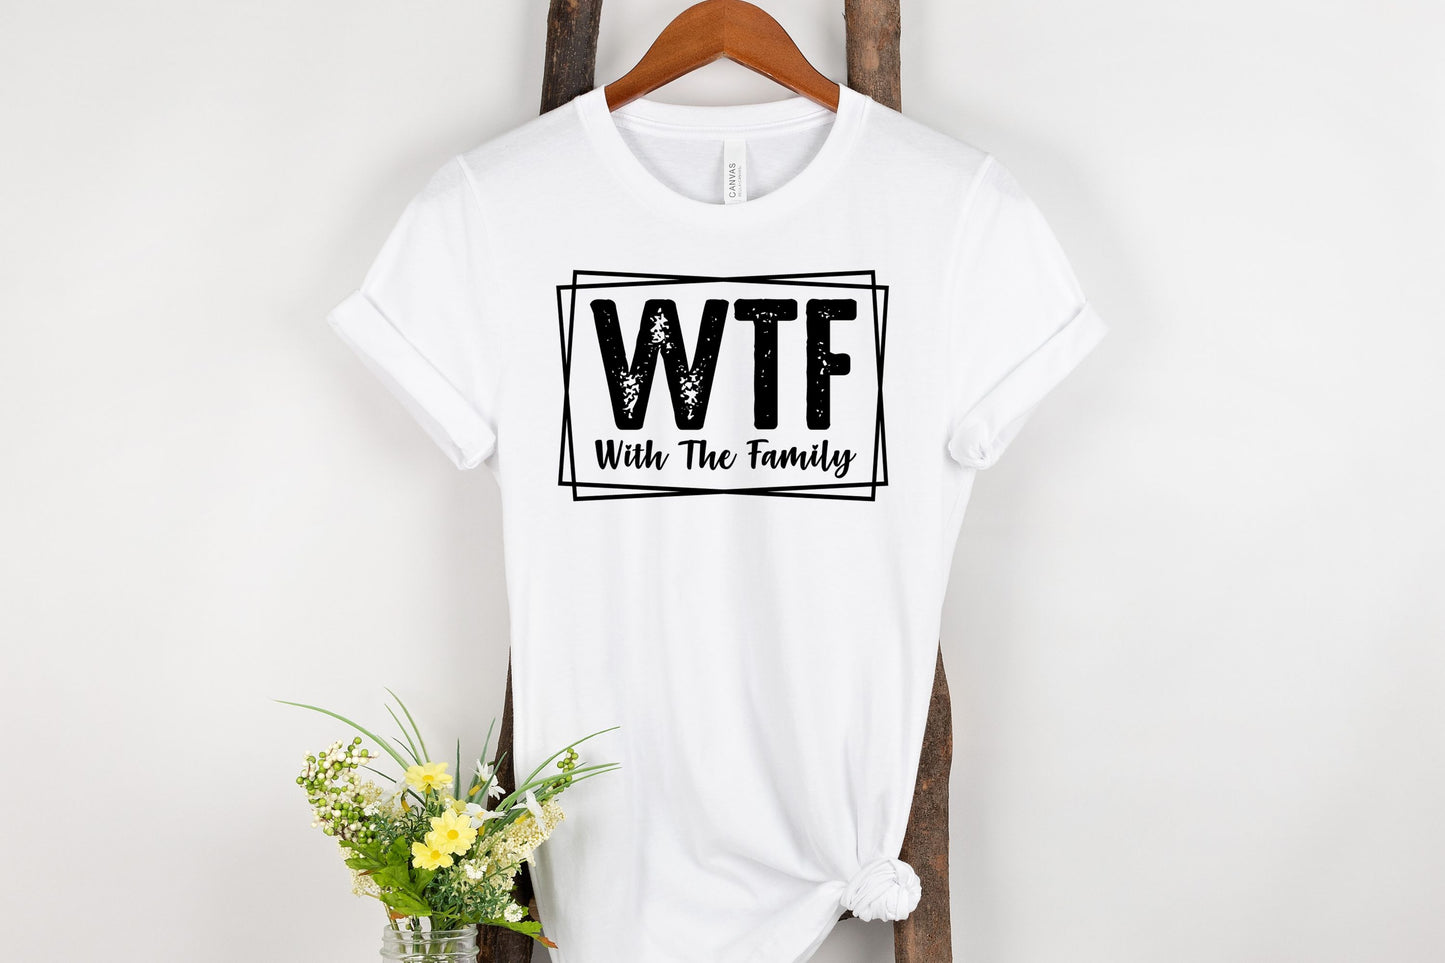 WTF With the Family Shirts, Funny Family Vacation Shirts, Family Matching Shirt, Funny Family Shirts